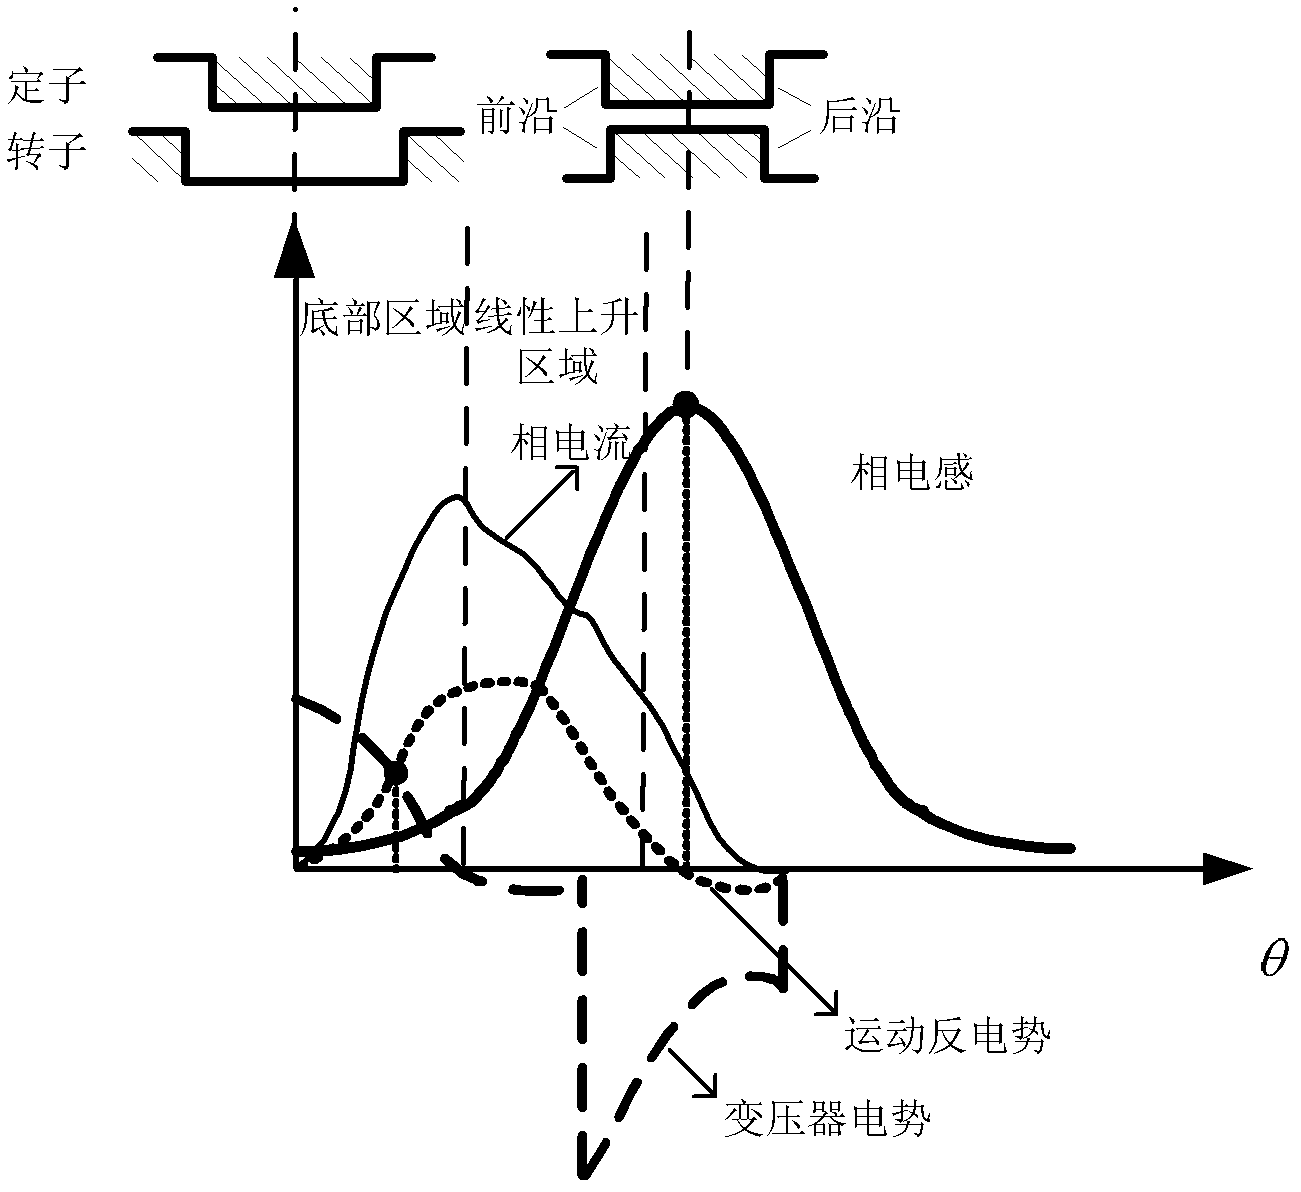 Position-sensor-free control method applicable to middle-high-speed switch reluctance motors